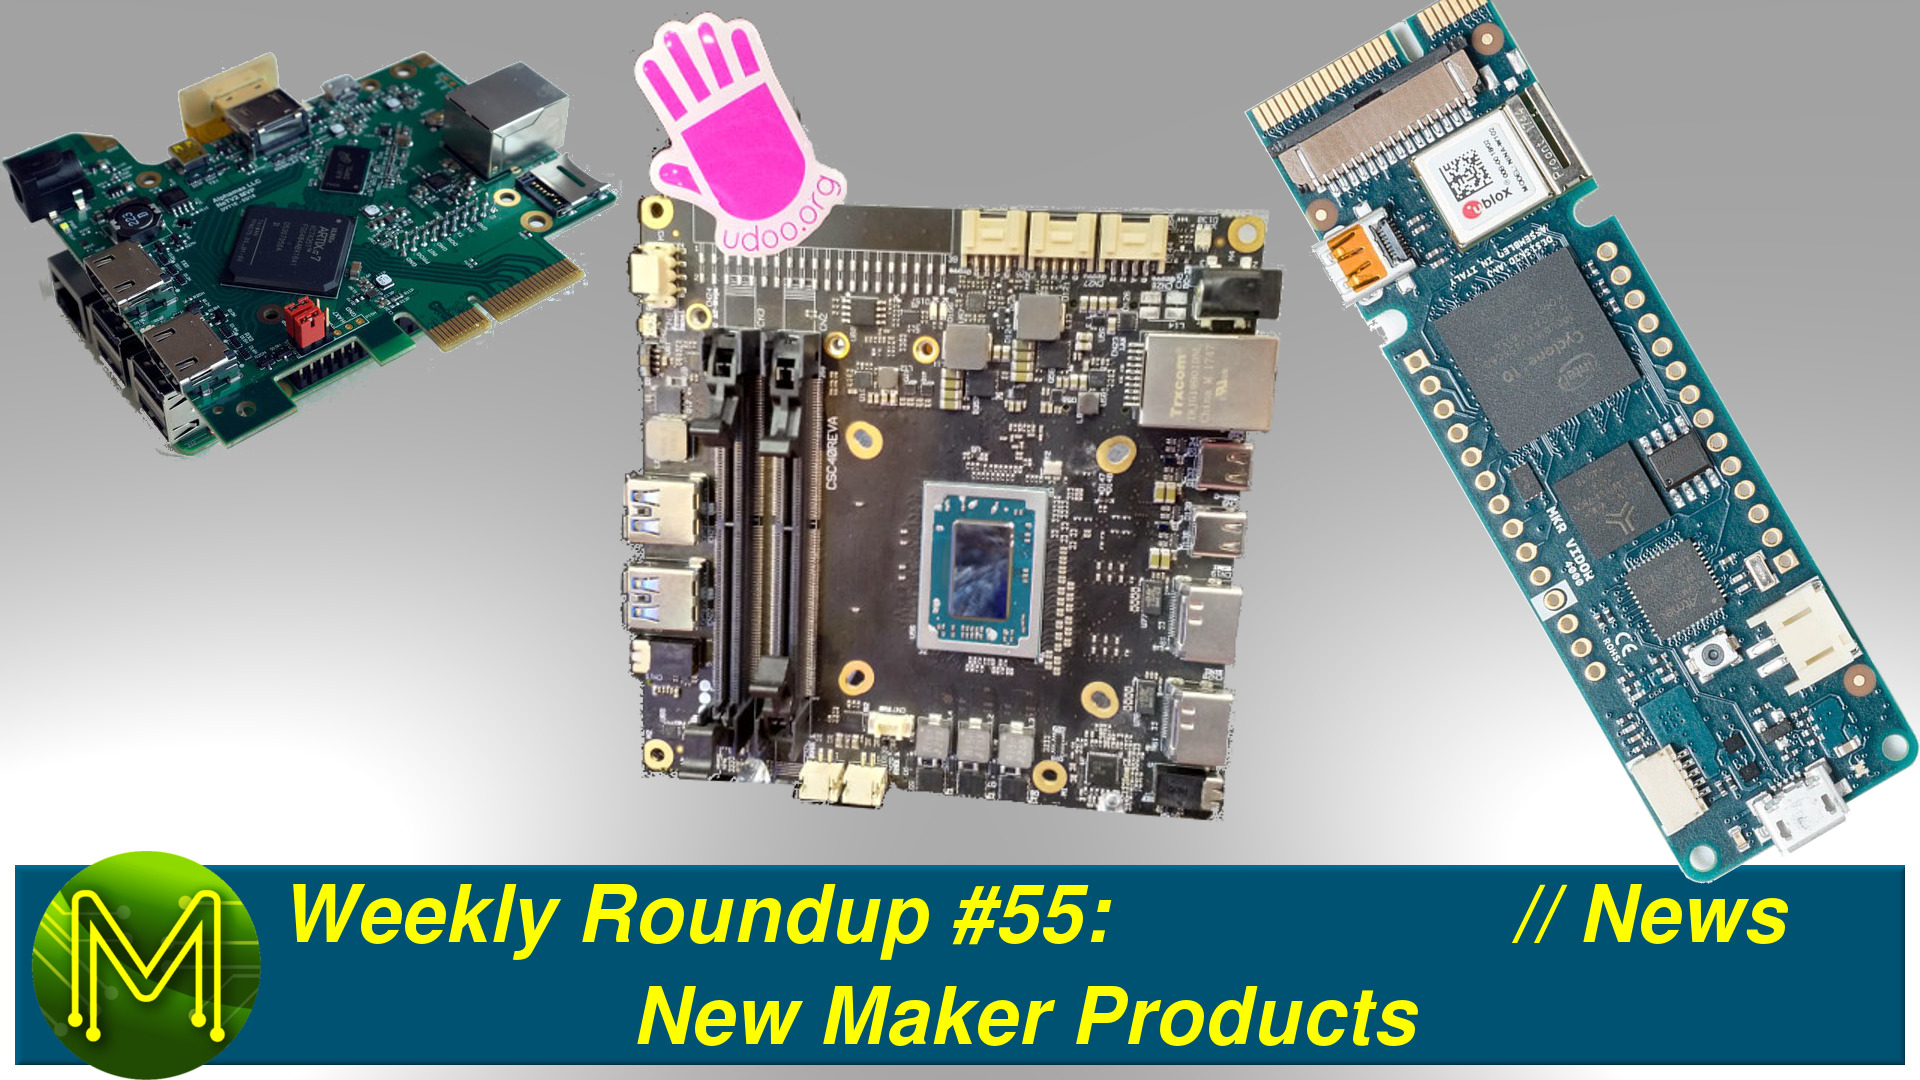 Weekly Roundup #55: New Maker Products // News